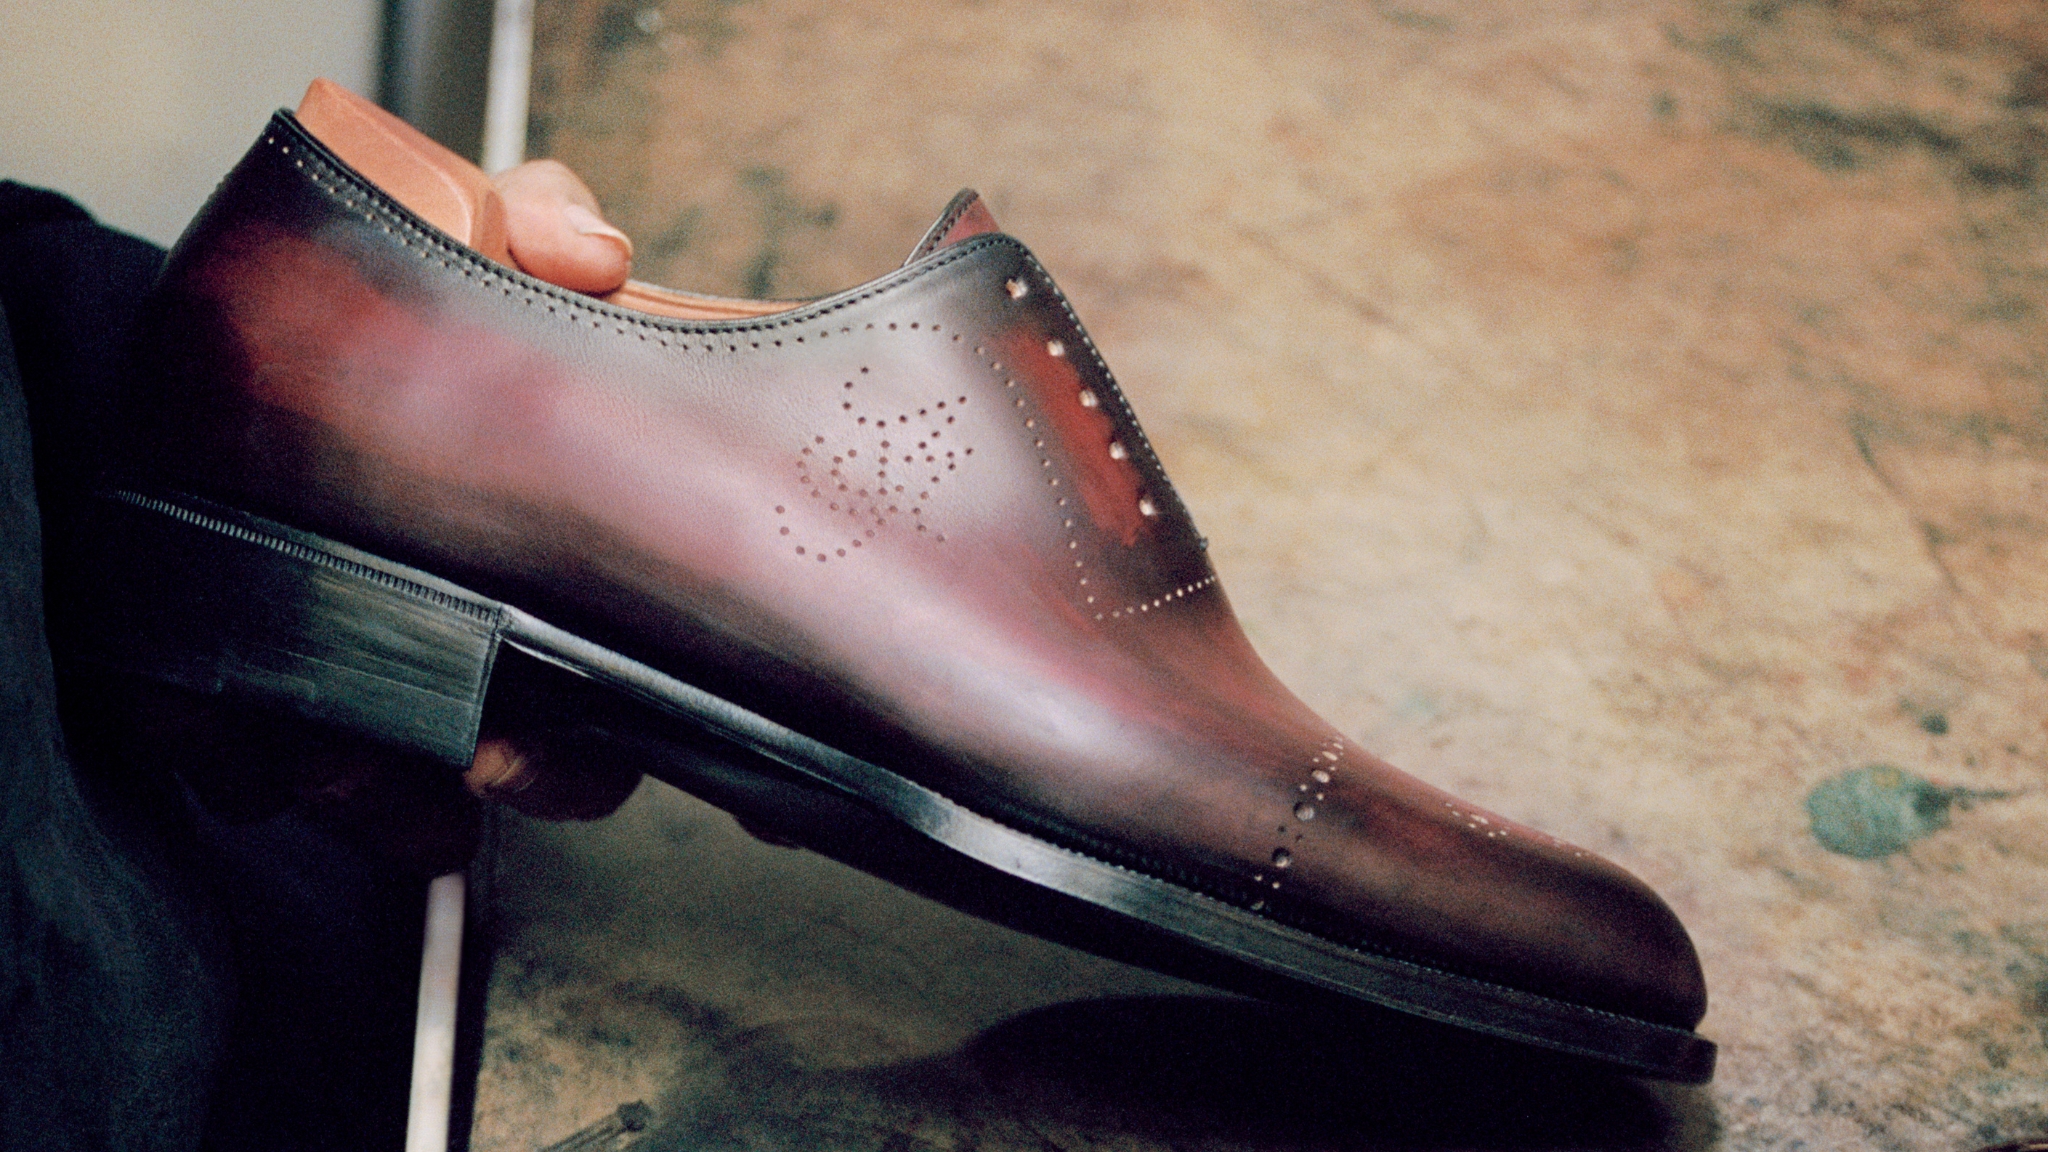 Behind the Scenes at the Berluti Workshops